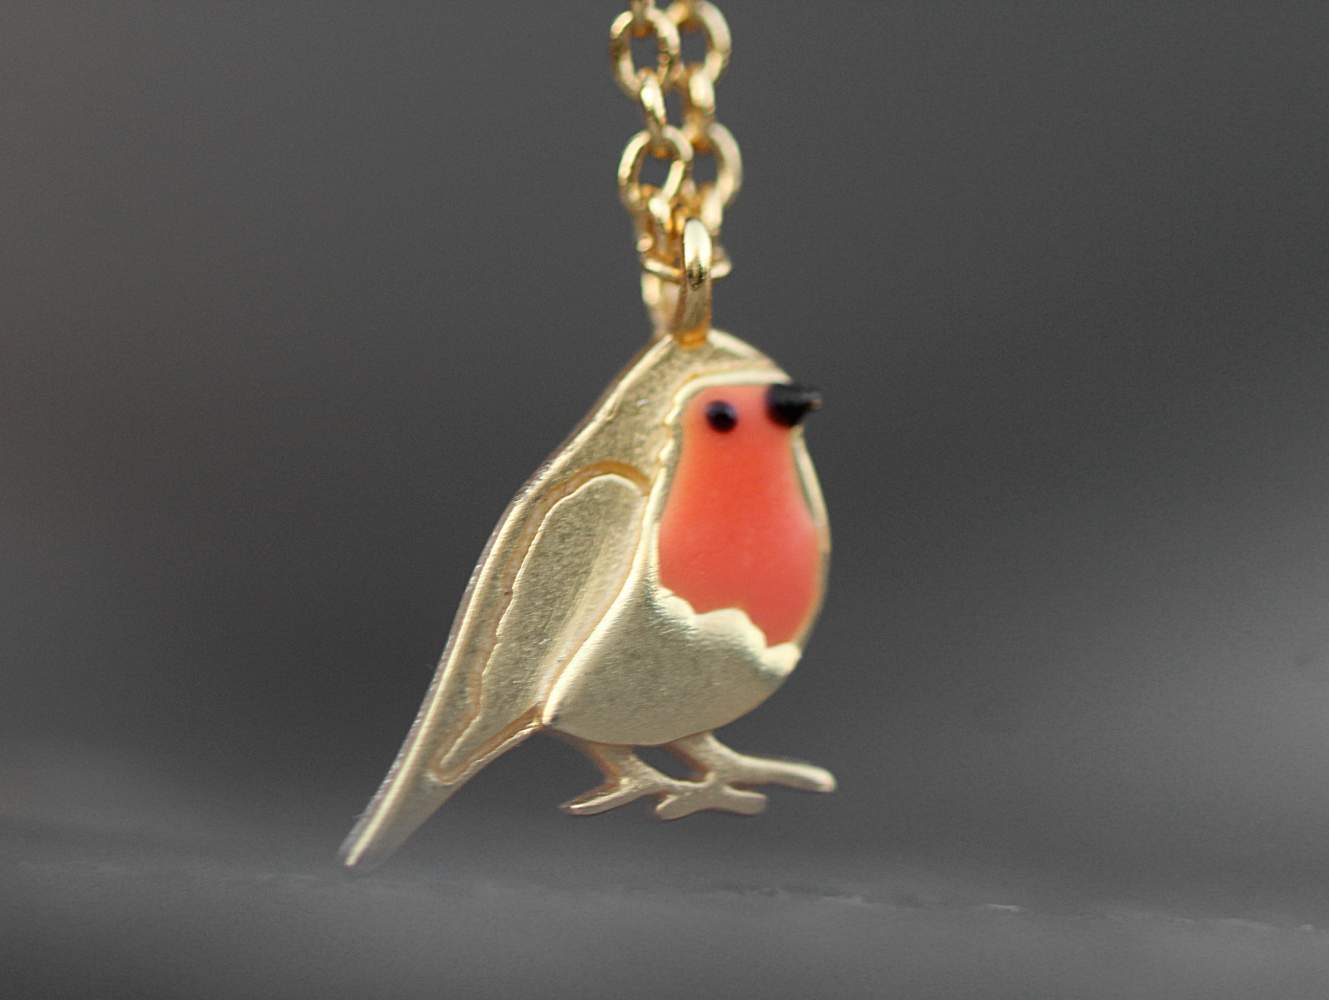 Dainty Robin Bird necklace. Gold plated sterling and orange enamel